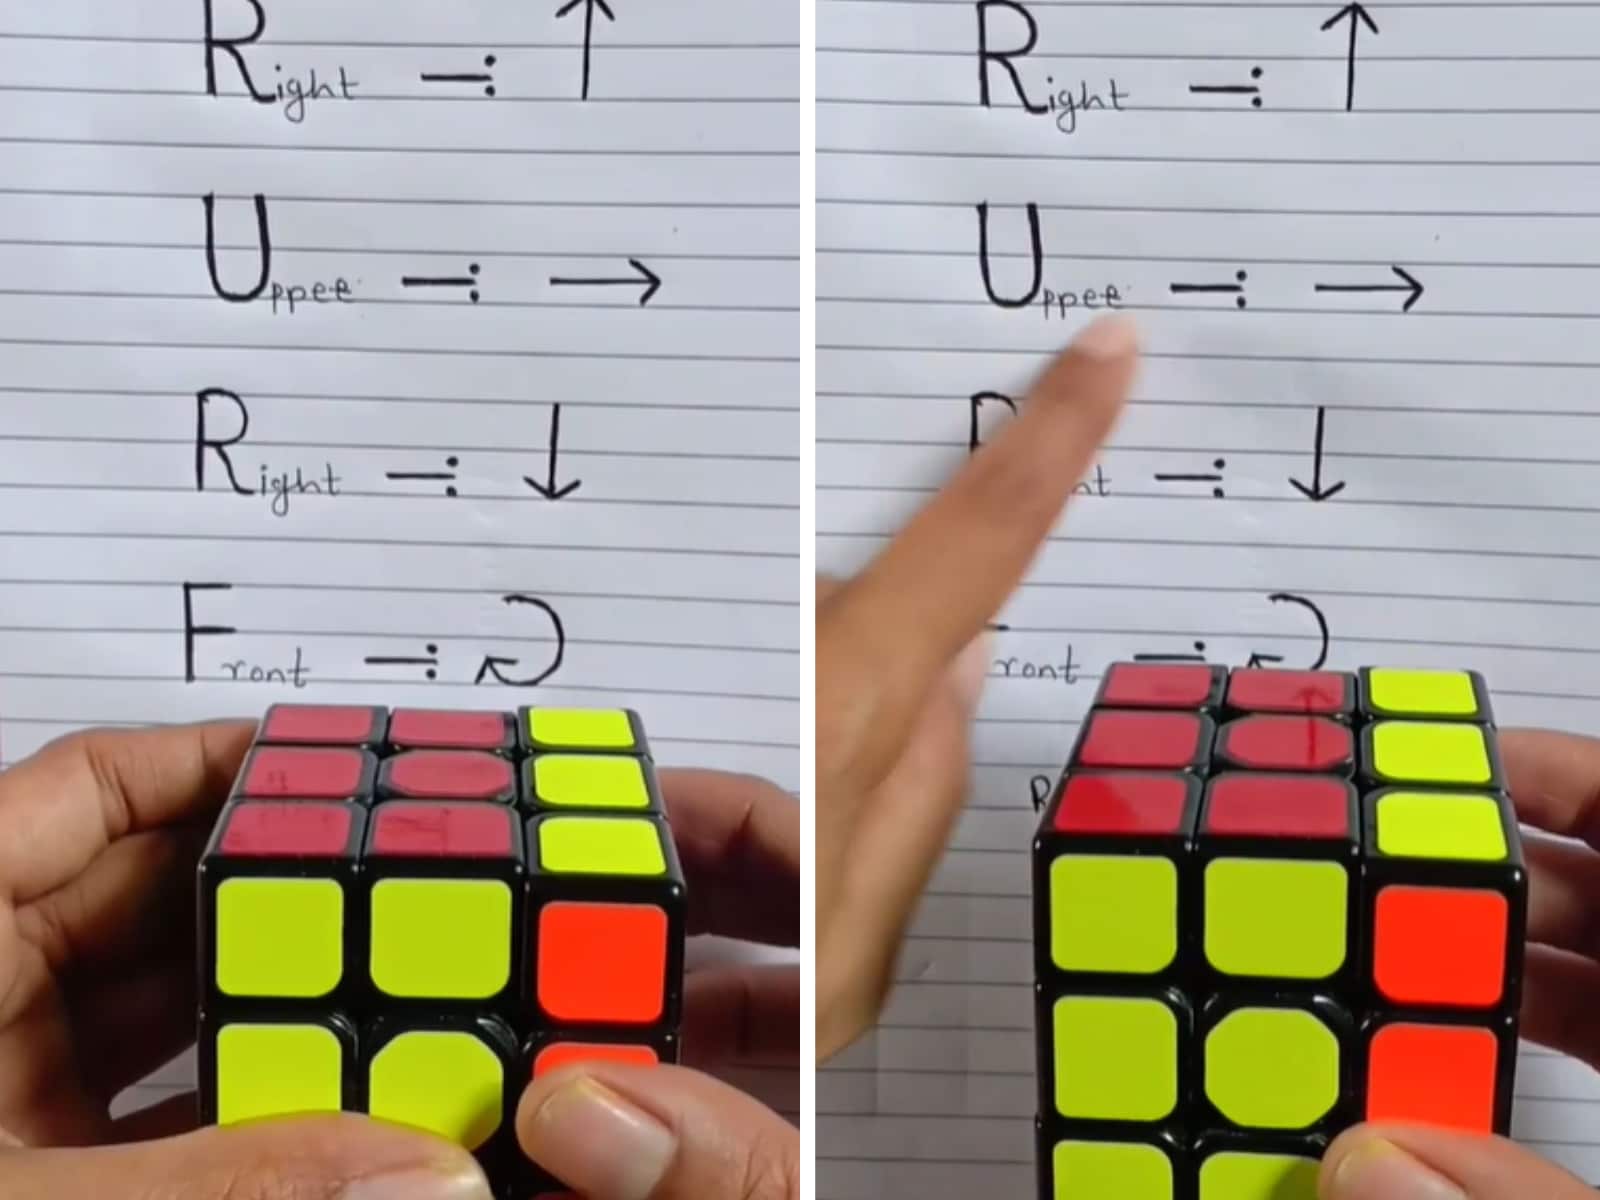 How to Solve a 3x3 Rubik's Cube Fast